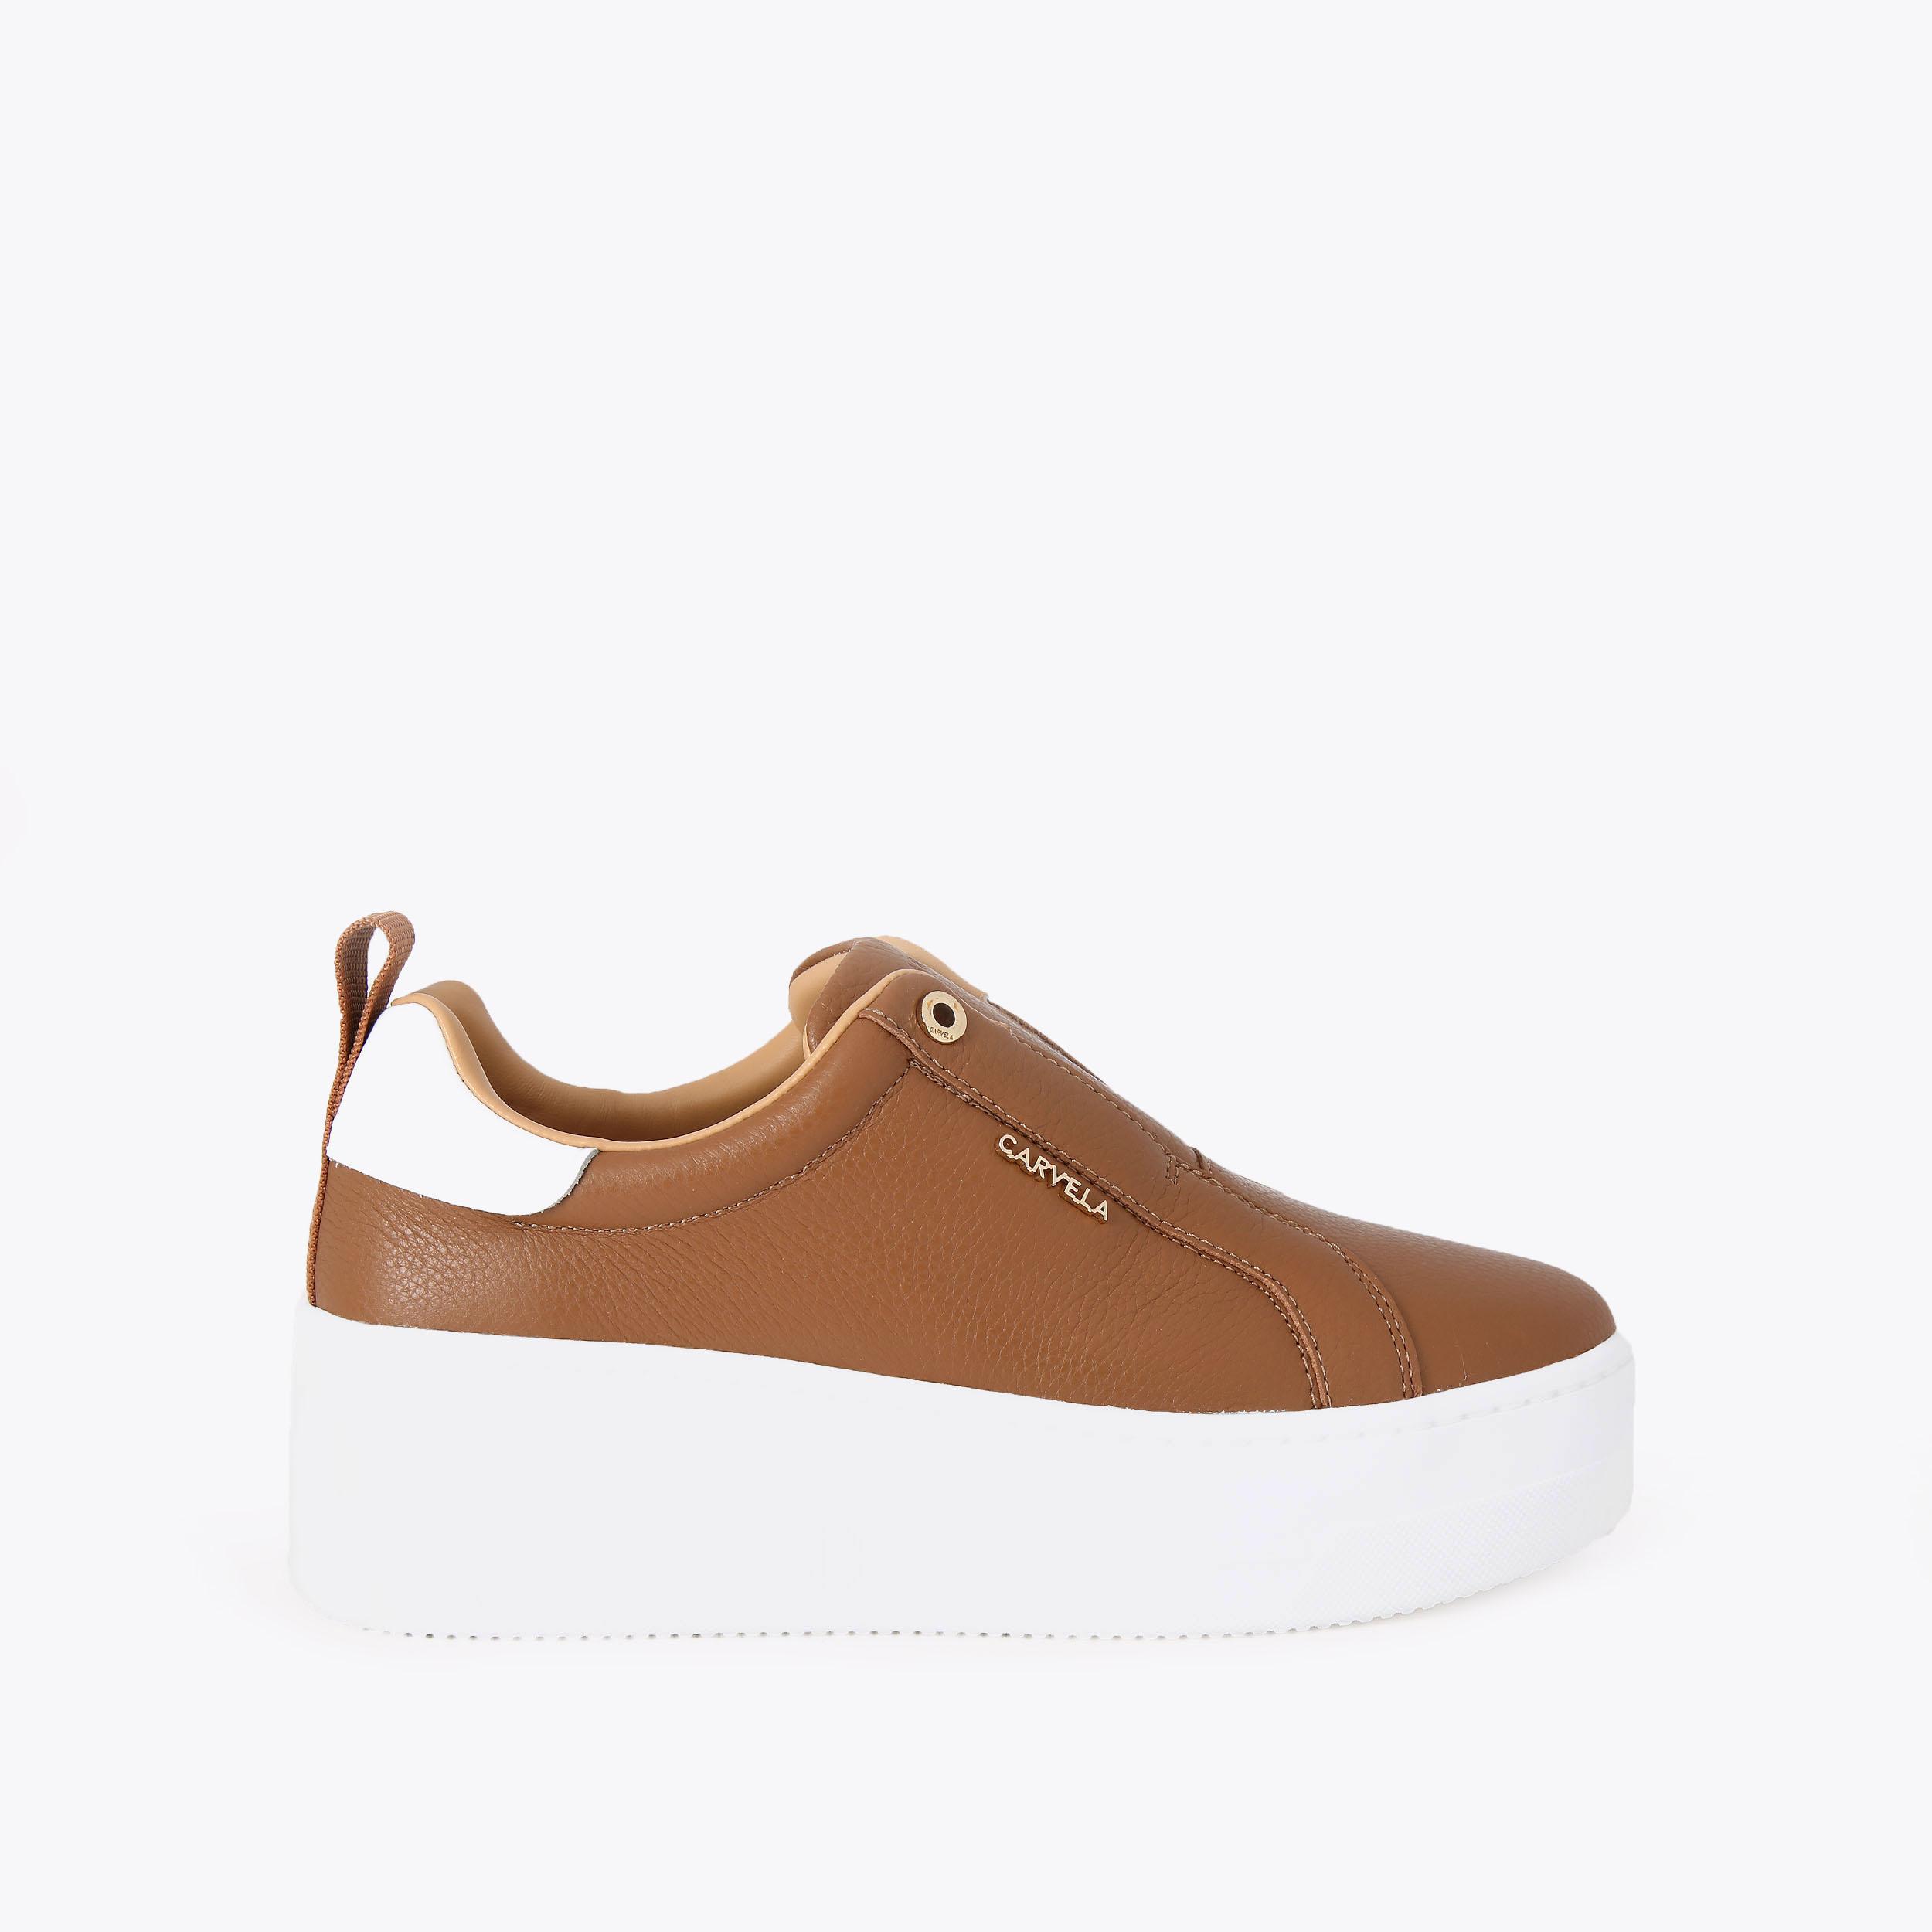 CONNECTED LACELESS Tan Leather Trainers by CARVELA